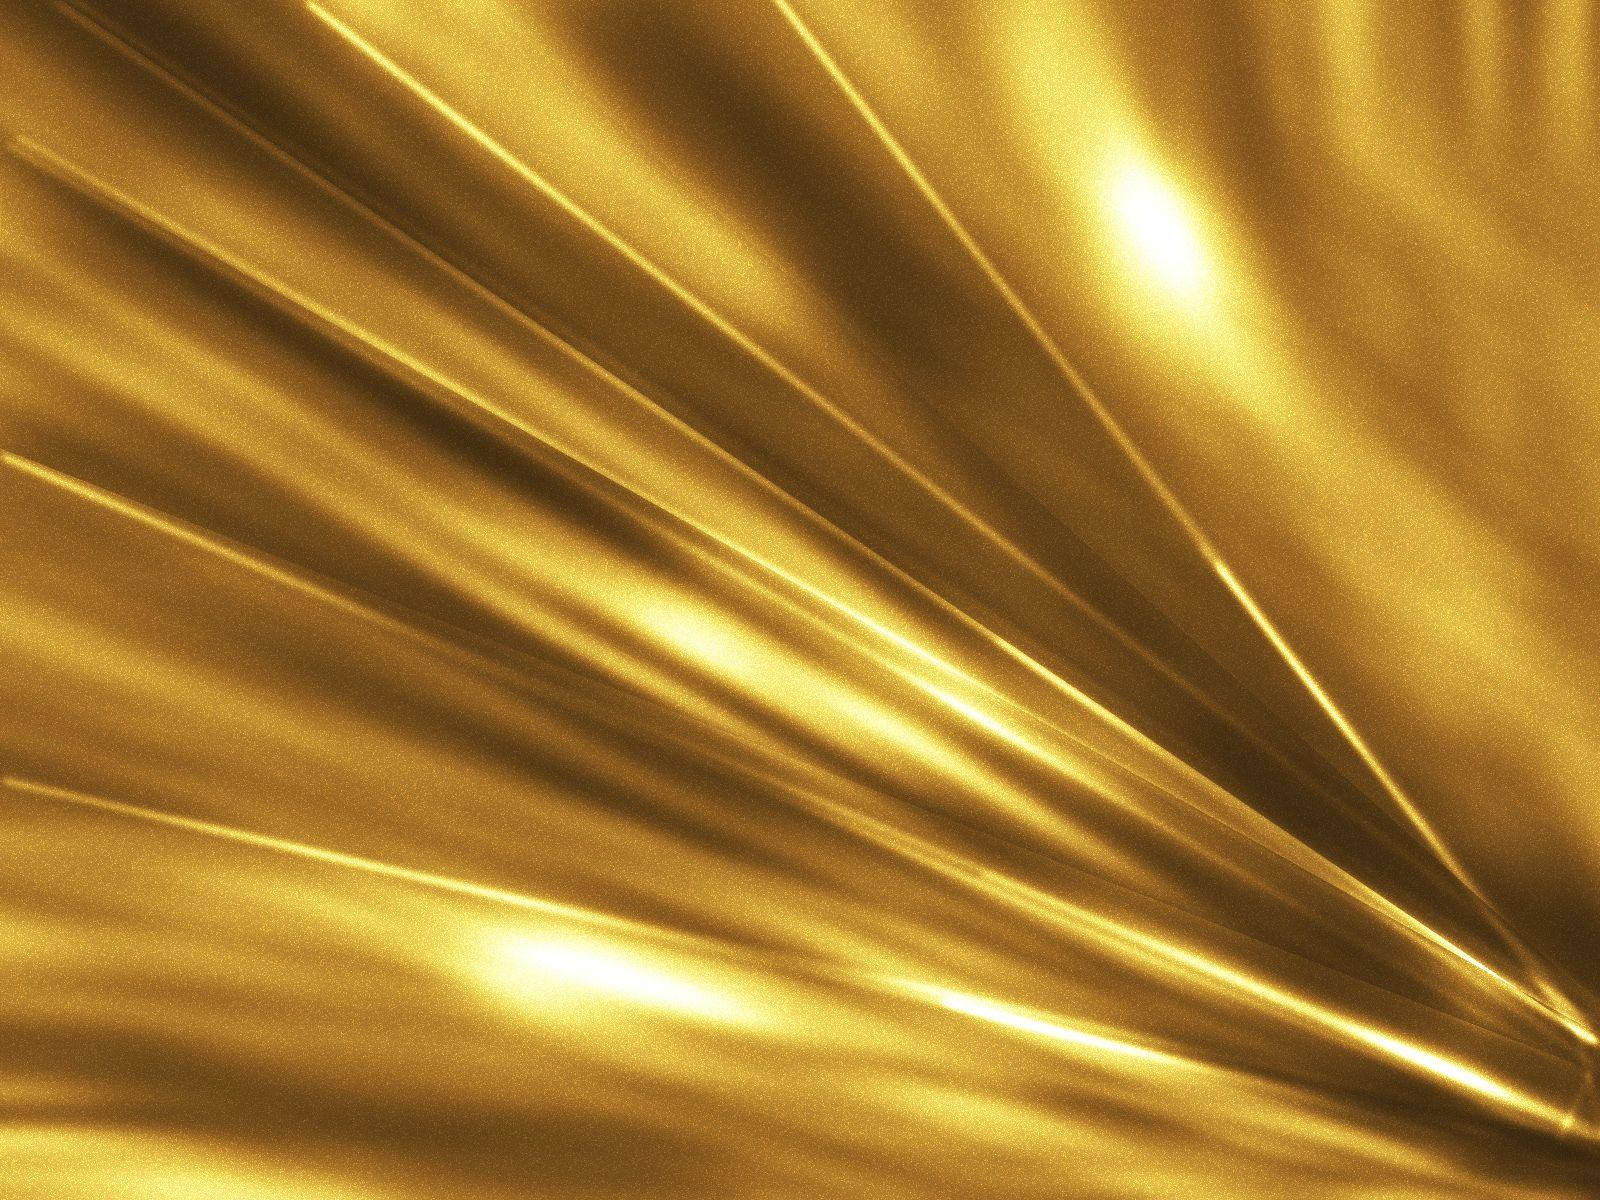 Gold Texture In Satin Background